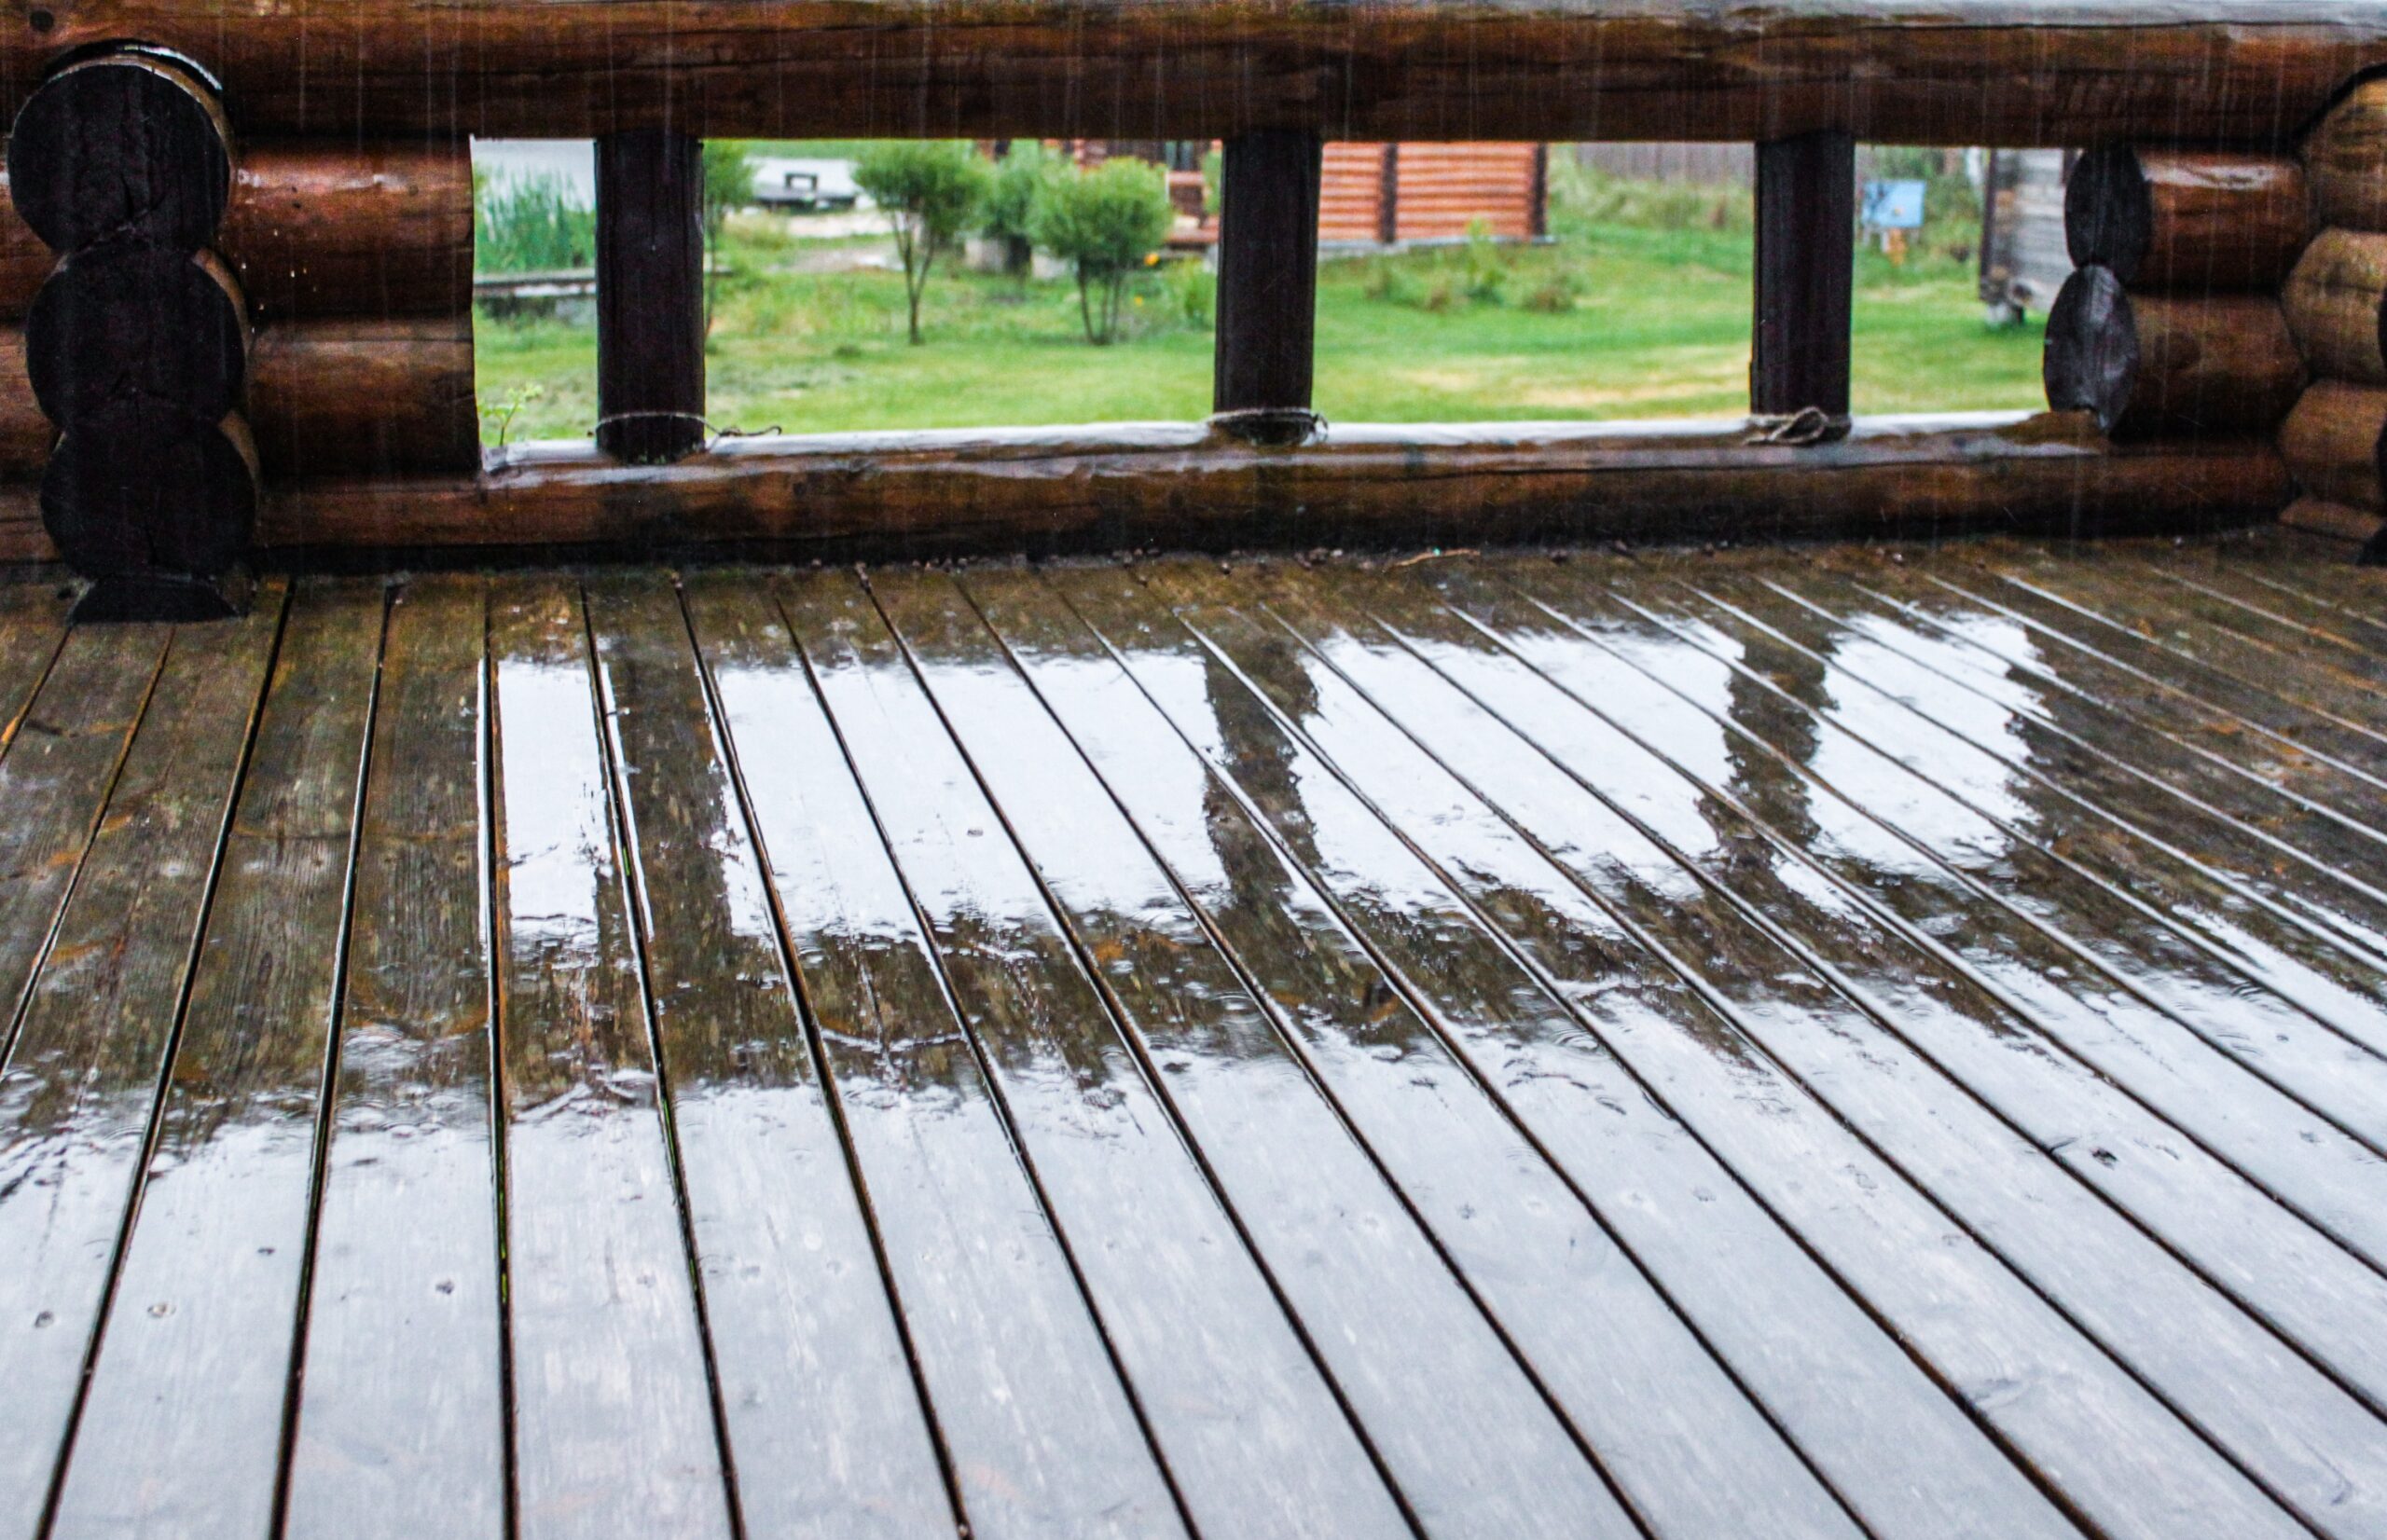 wooden terrace in the rain drops reflecting relaxation empty space house splash weather terrace t20 mLv9pE scaled